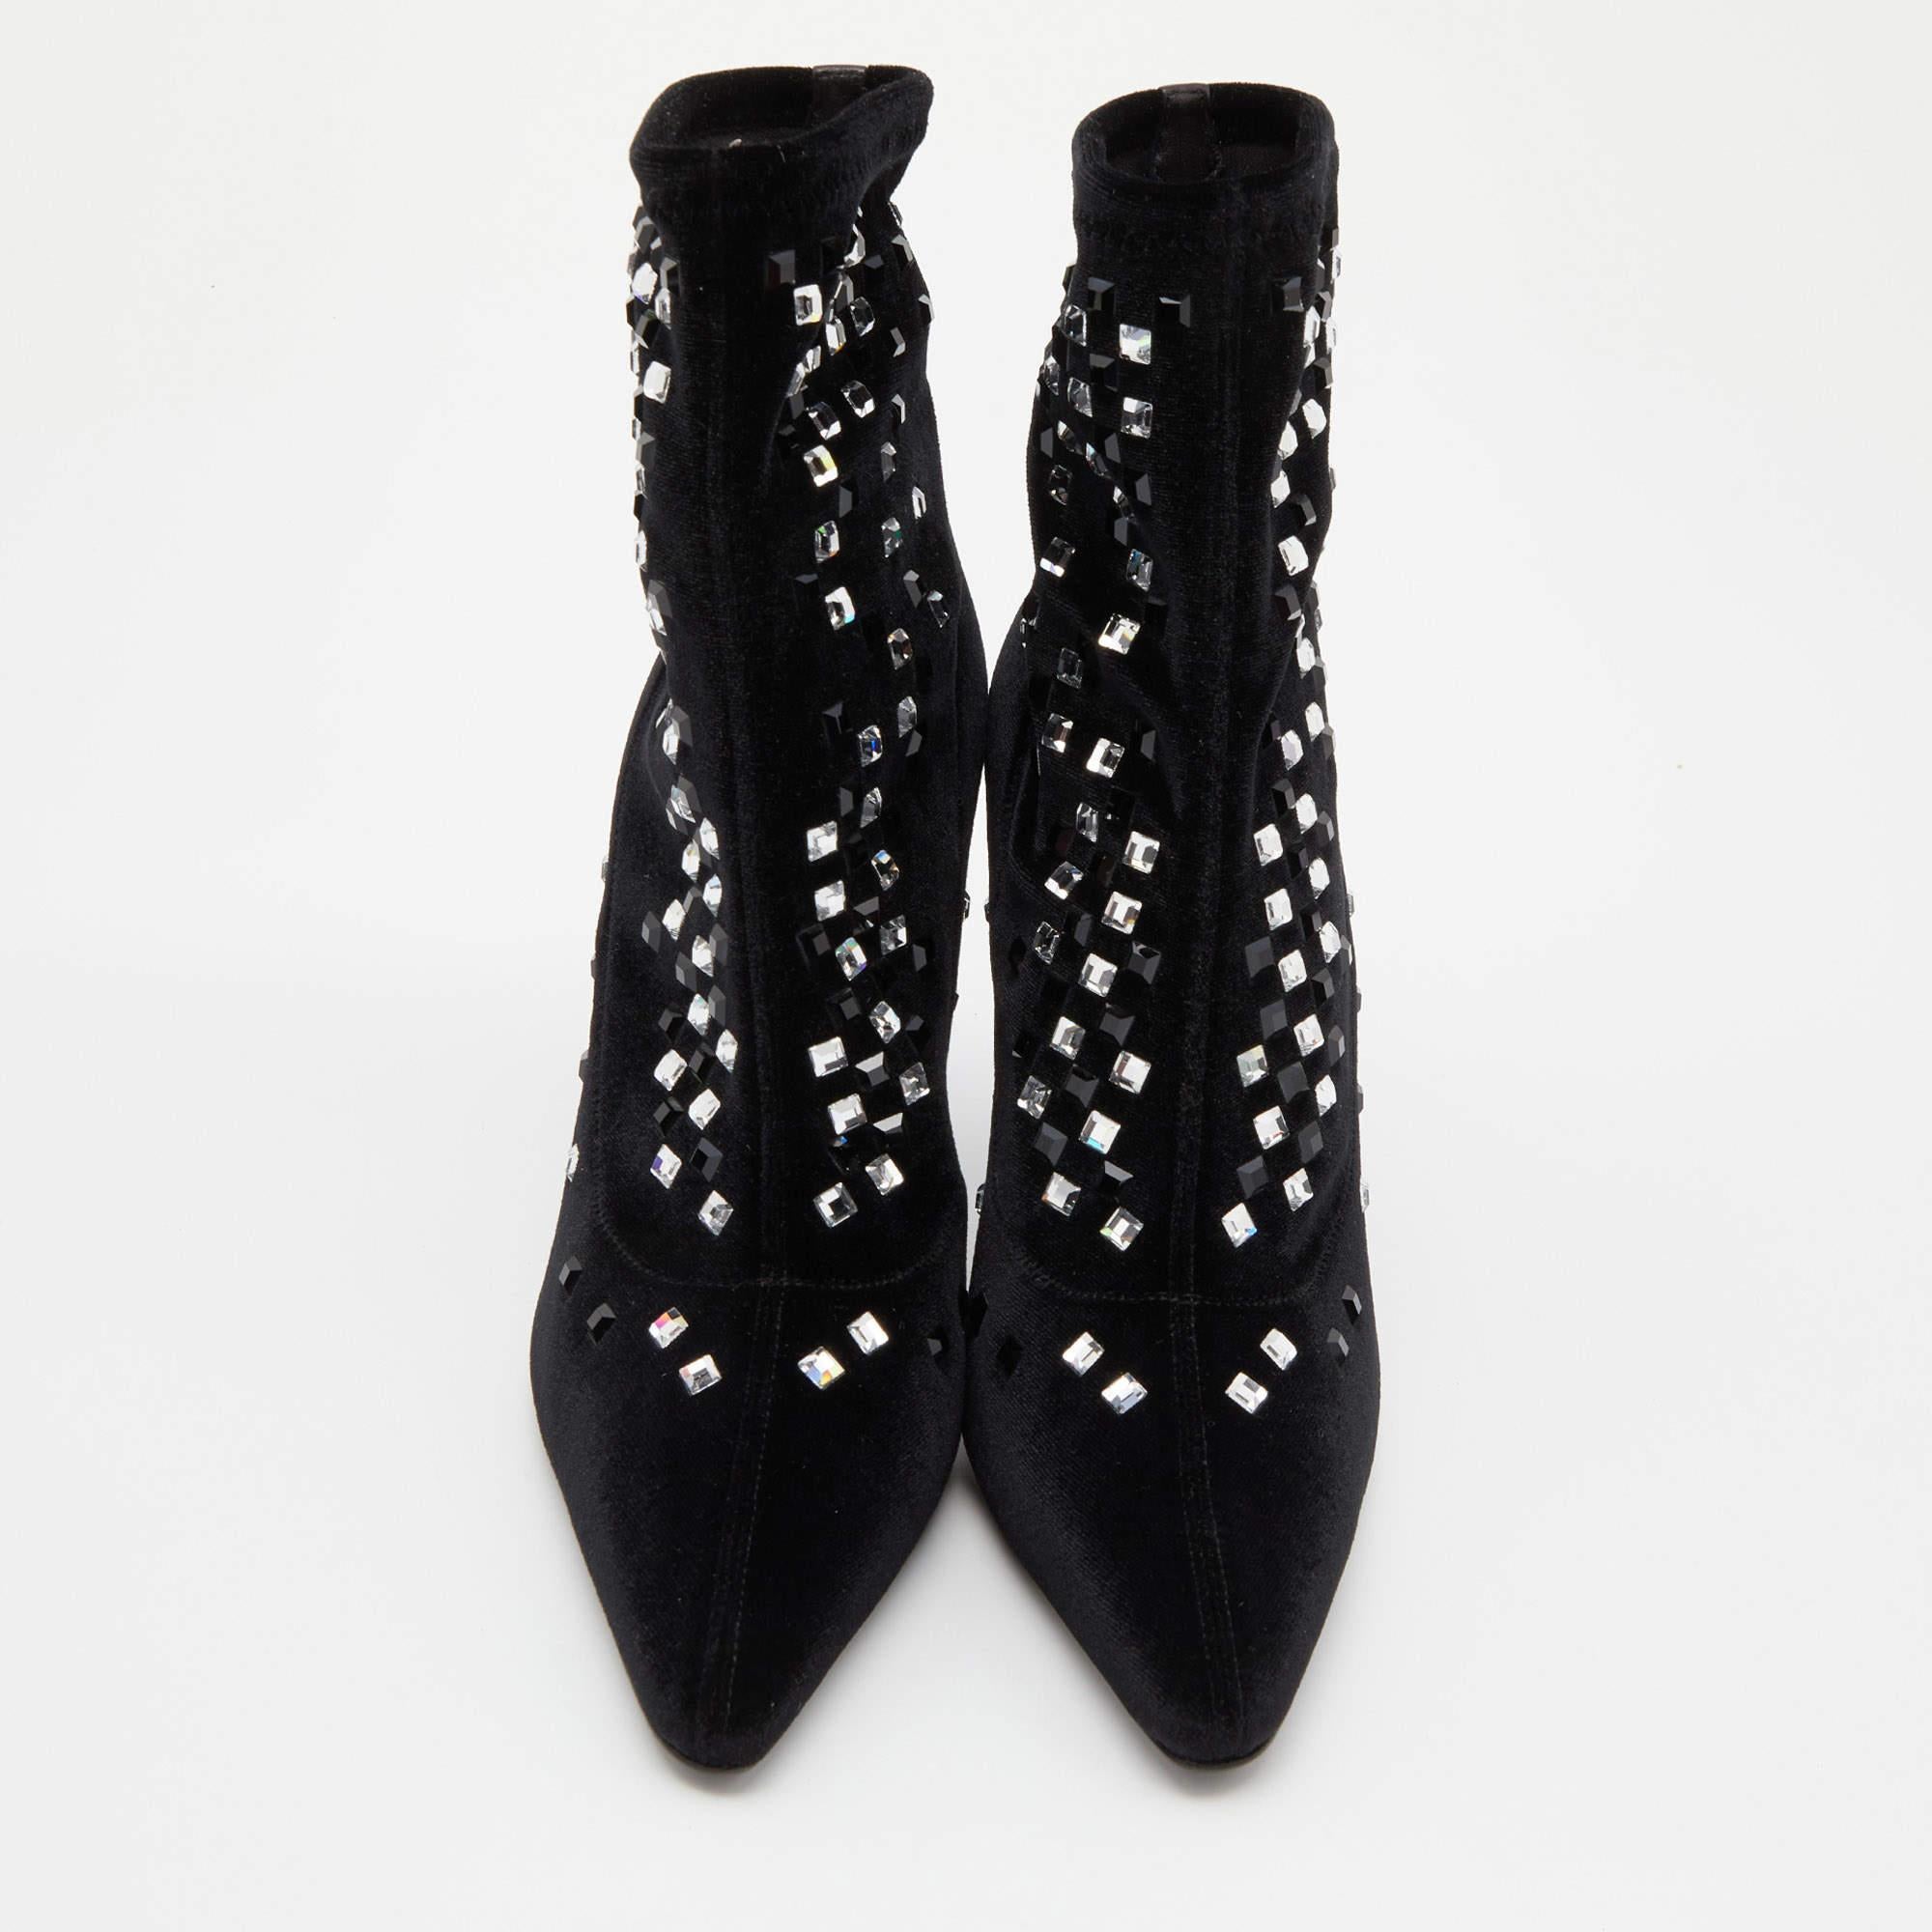 A pair of designer boots by Giuseppe Zanotti to light your steps in a fashionable manner. The black boots are finely crafted from velvet and designed with pointed toes, tall cm heels, and embellishments.

